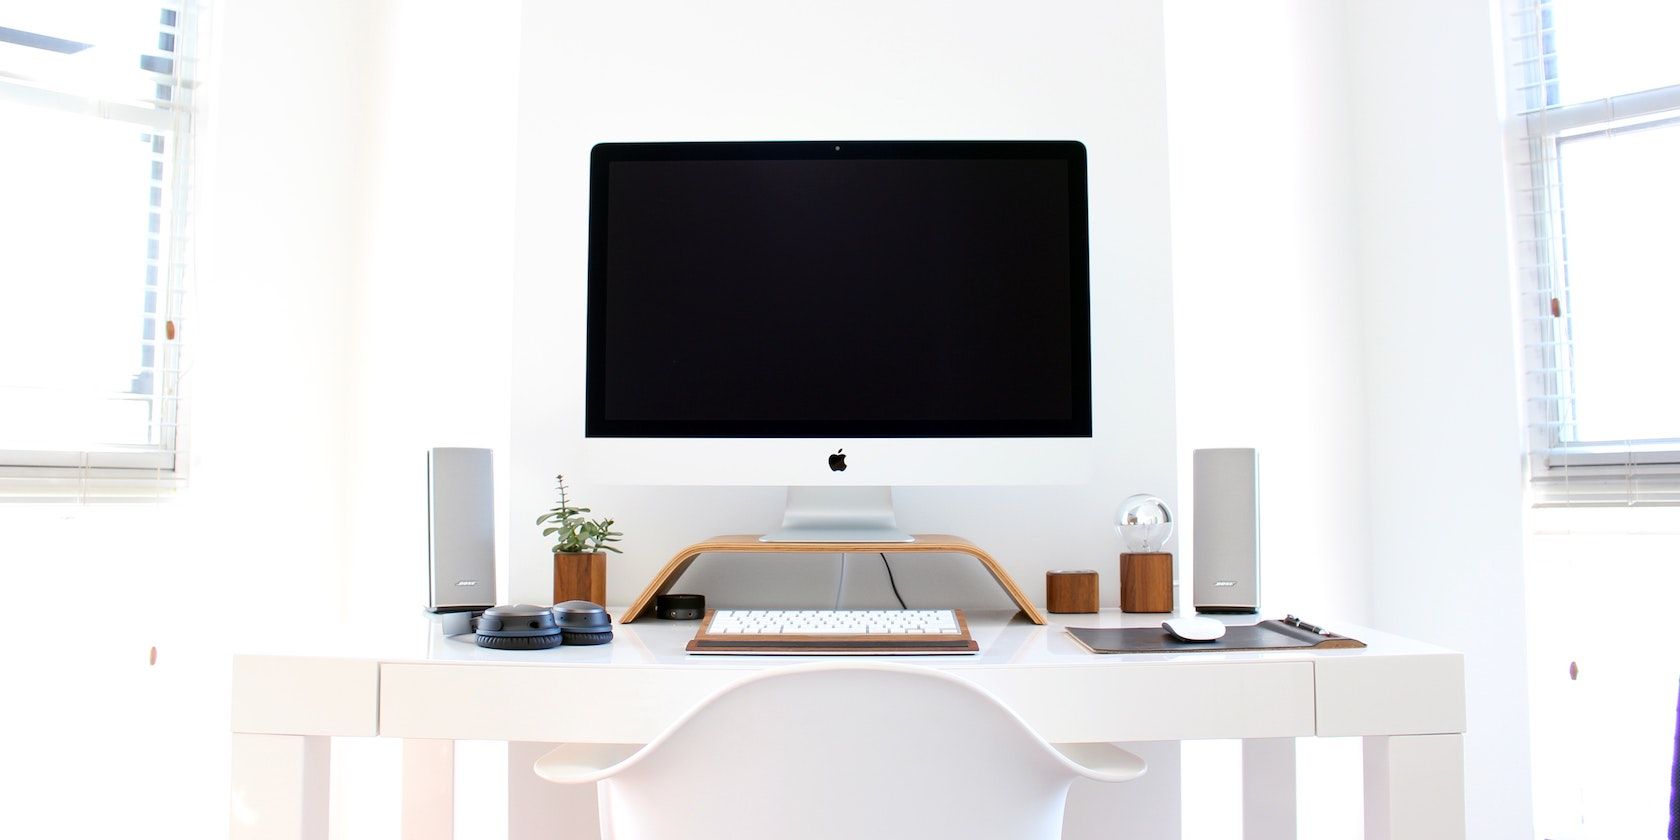 A photograph of a desktop iMac on an organised desk, in a white room with white furniture